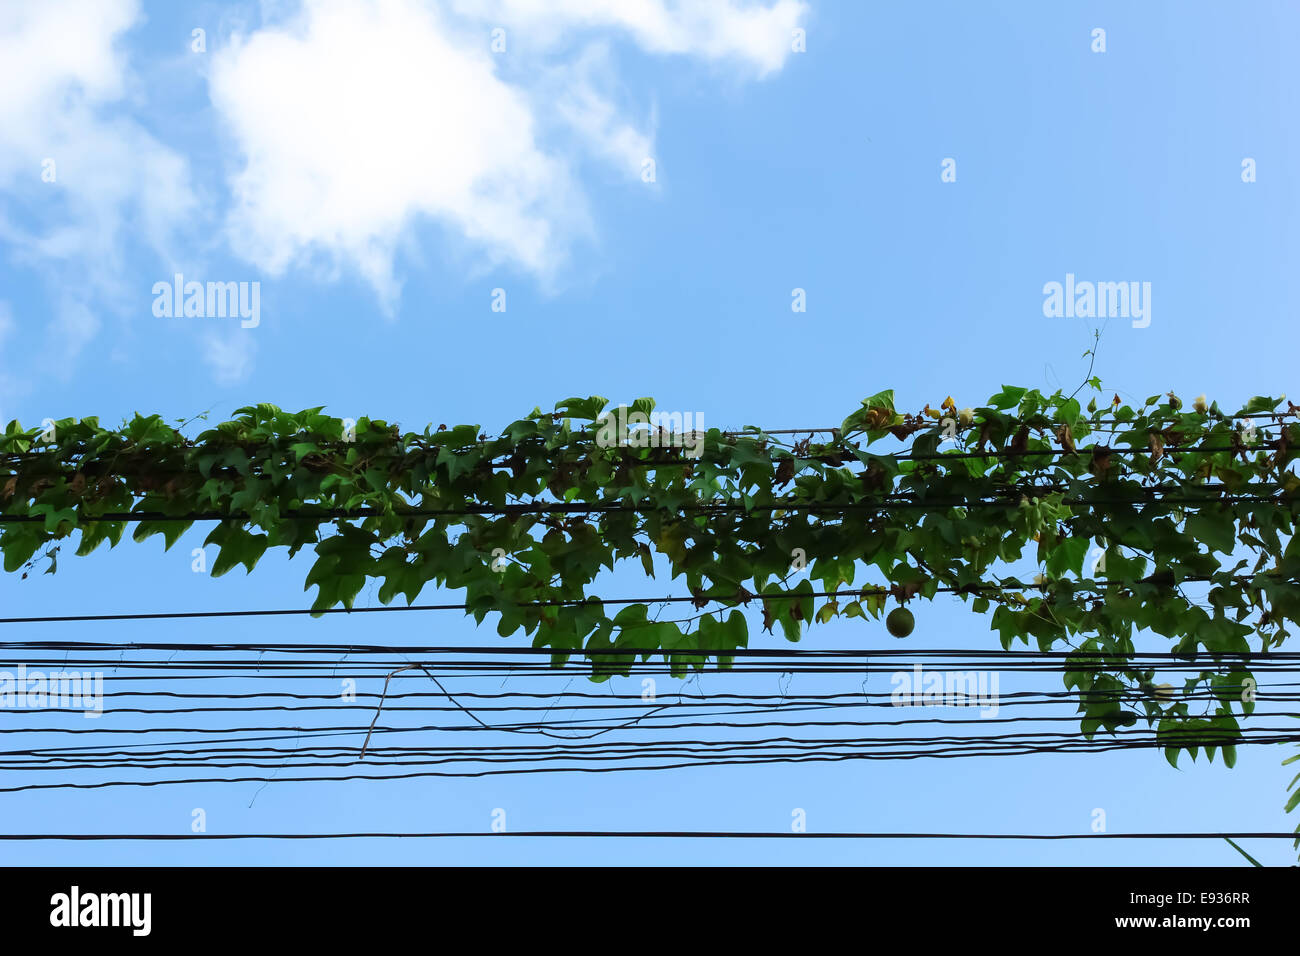 Ivy on power lines with blue sky. Stock Photo